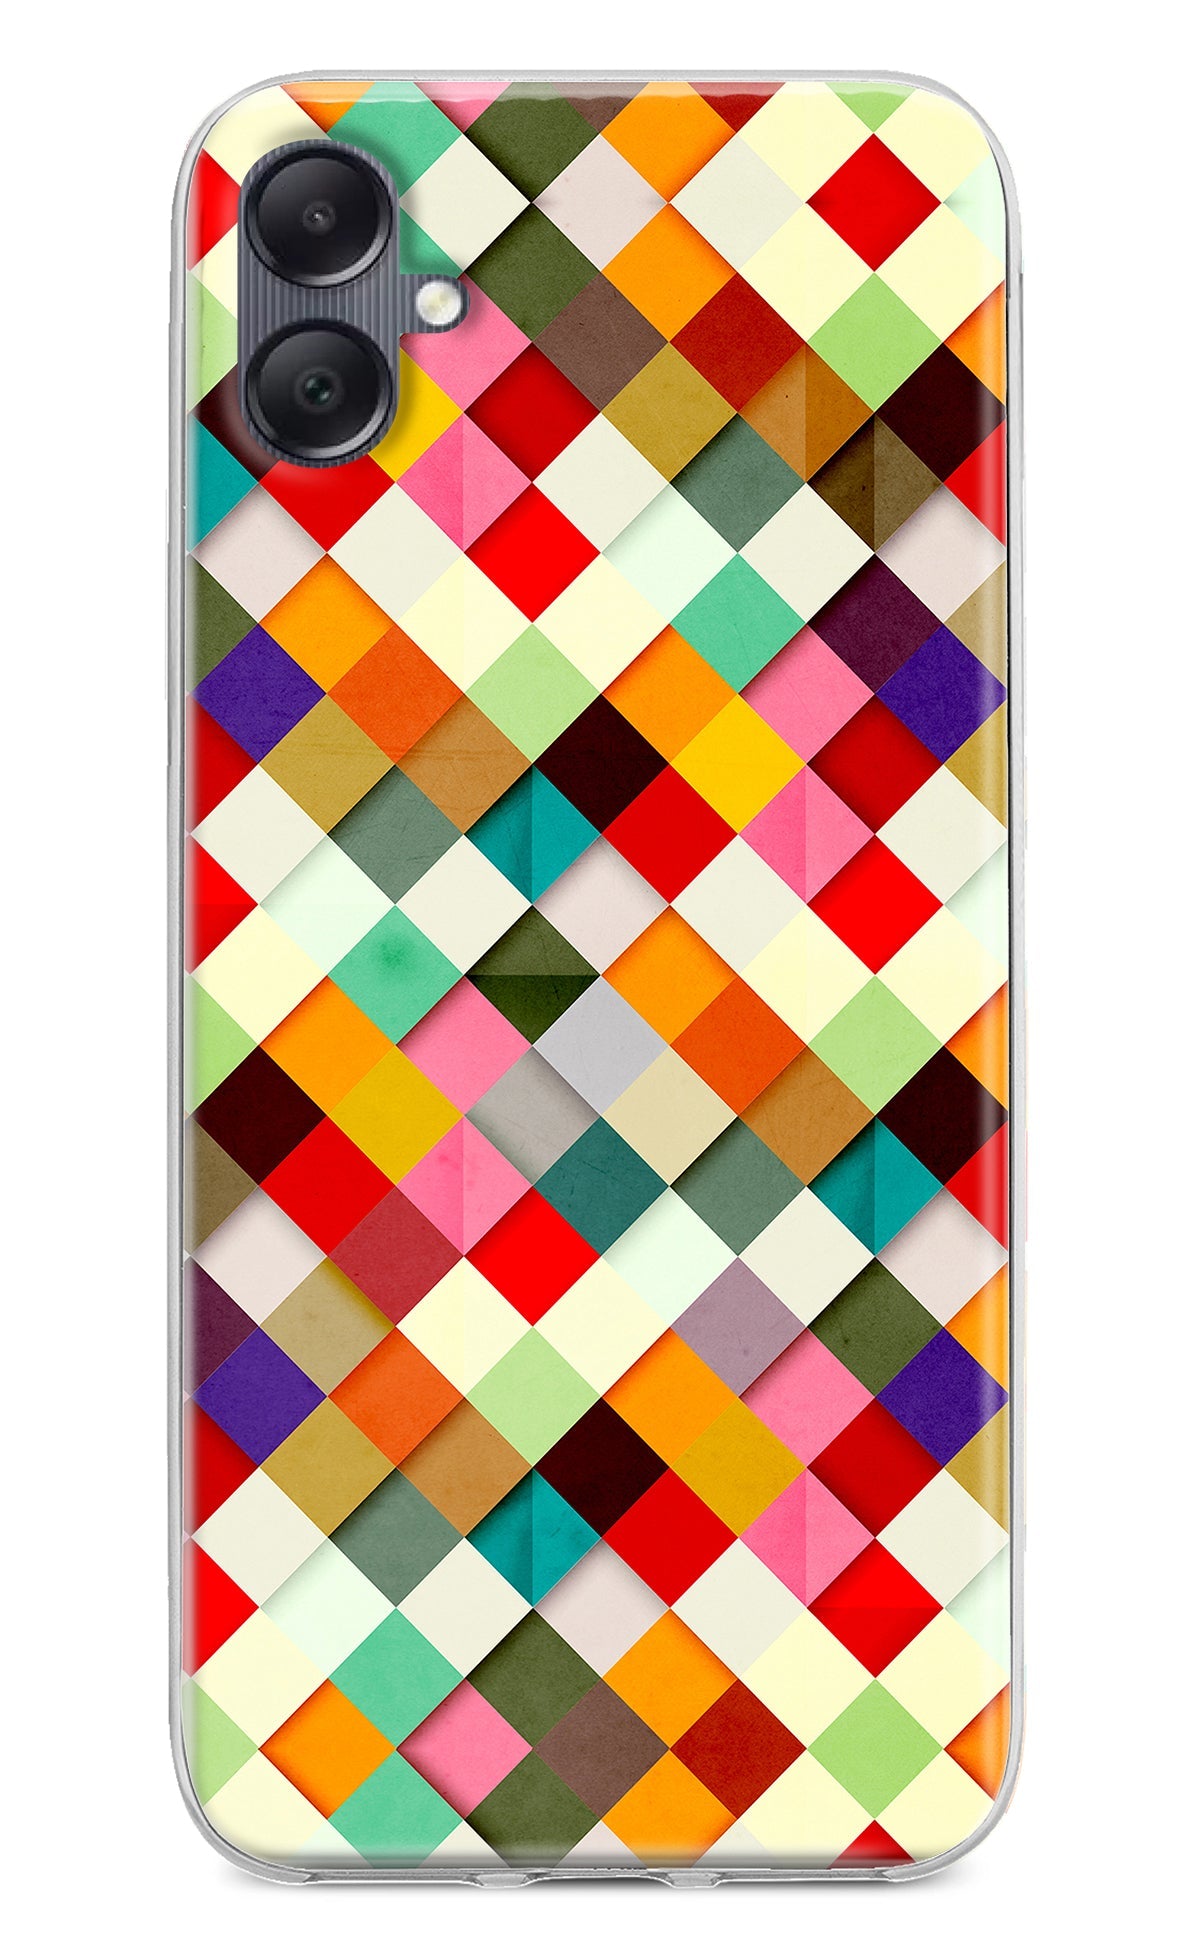 Geometric Abstract Colorful Samsung A05 Back Cover